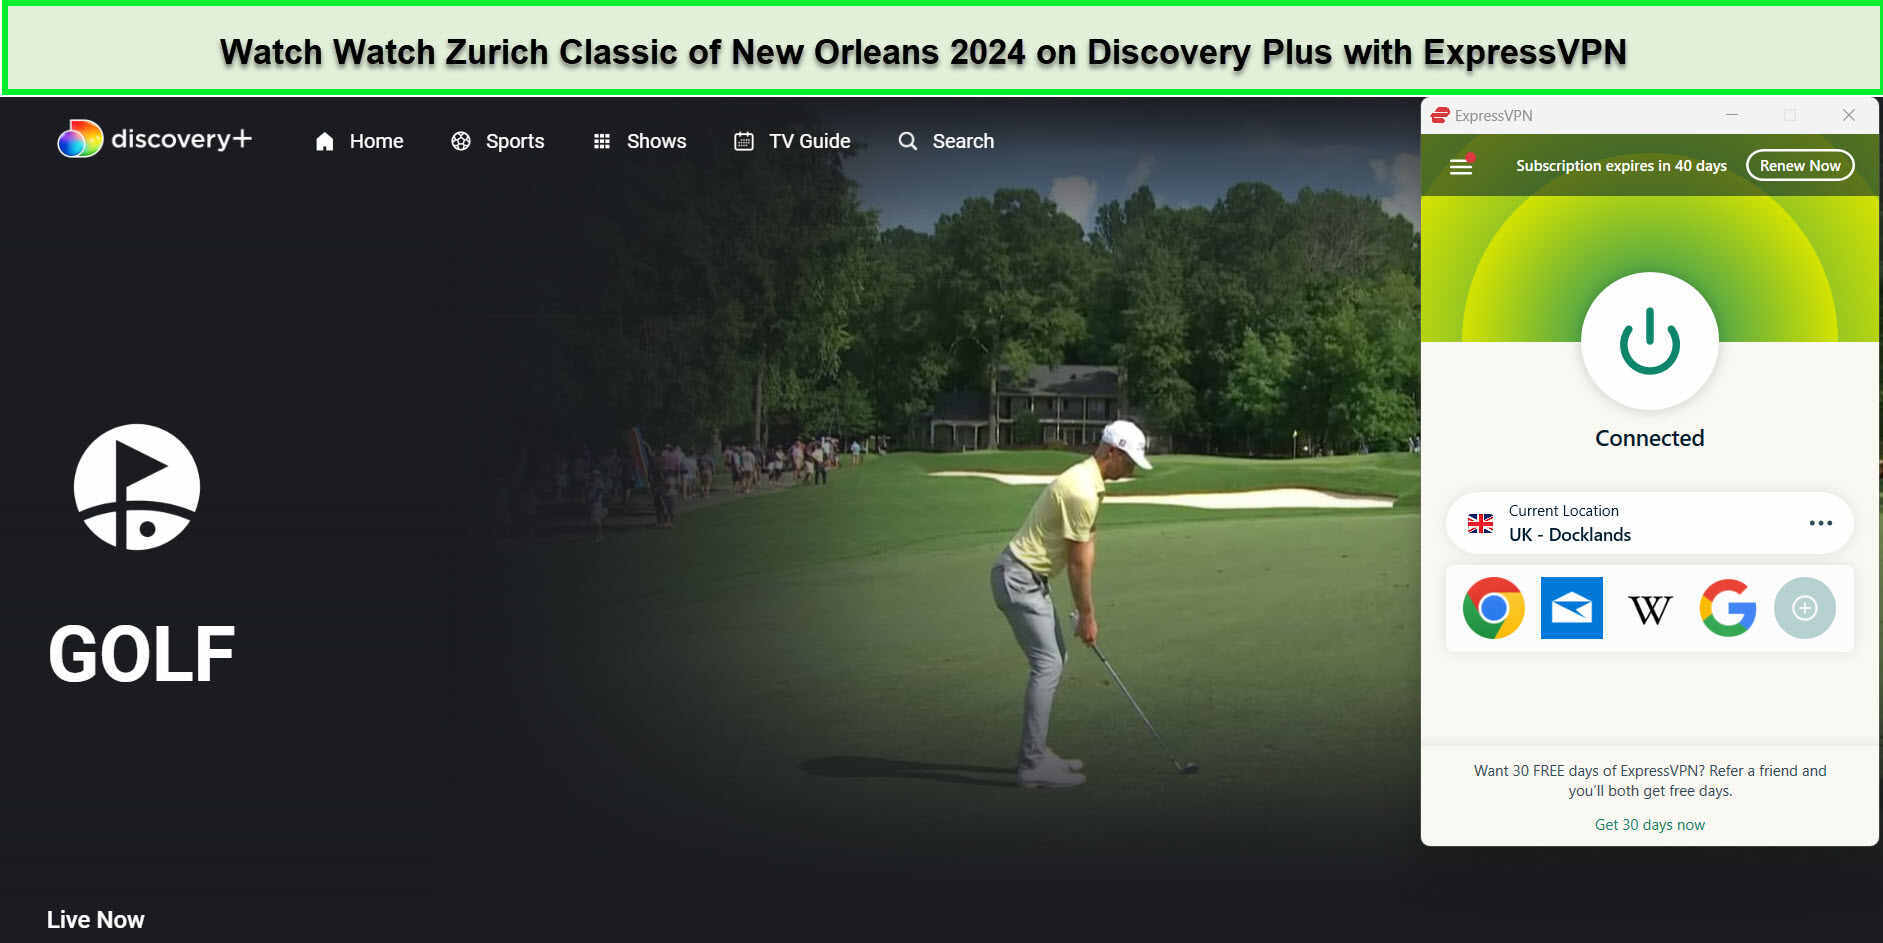 Watch-Zurich-Classic-of-New-Orleans-2024-in-New Zealand-On-Discovery-Plus-with-ExpressVPN